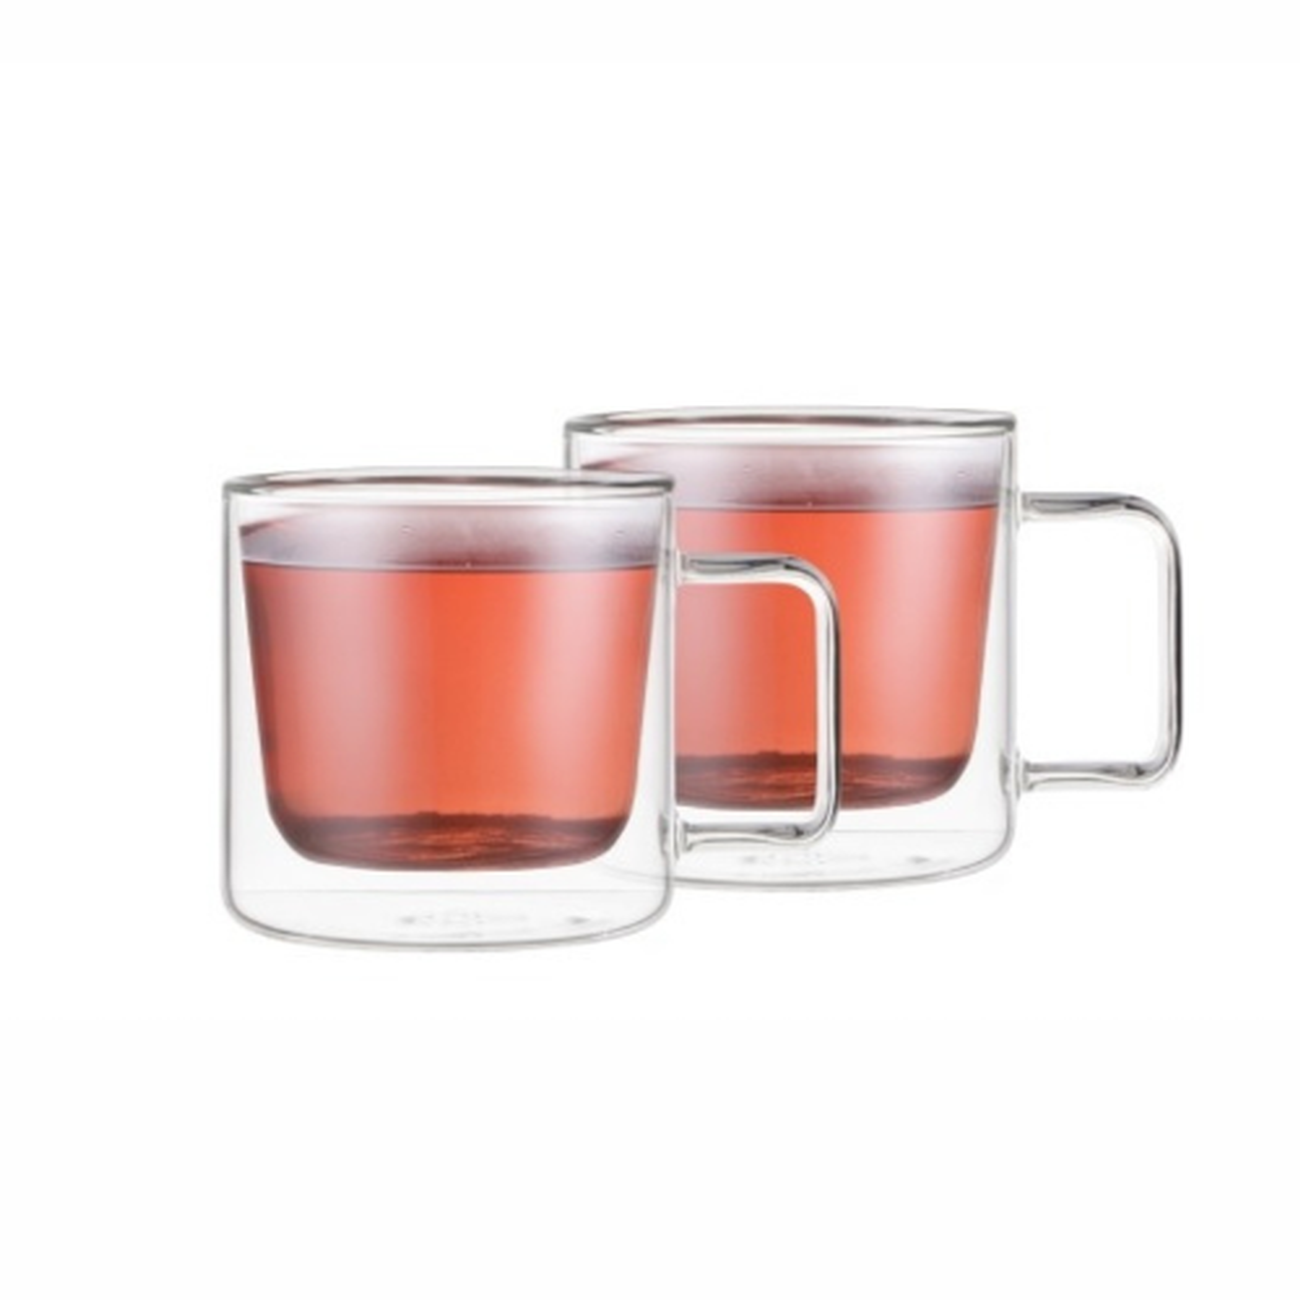 weis-double-walled-glass-set2-250ml - Weis Double Walled 150ml Glass Cup Set of 2